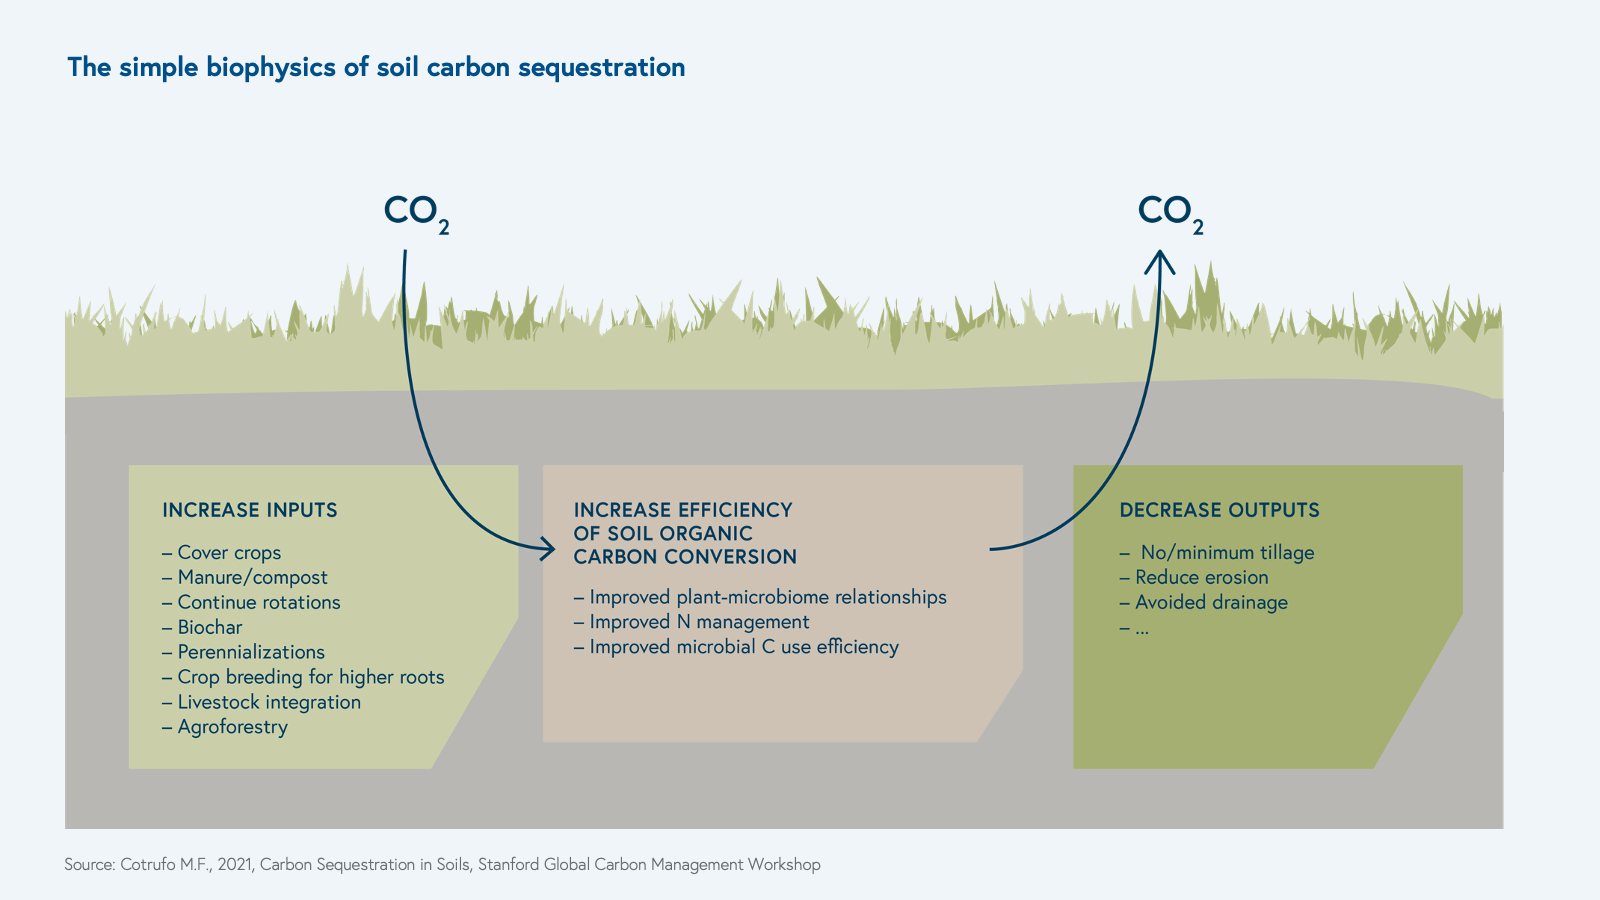 The simple biophysics of soil carbon sequestration